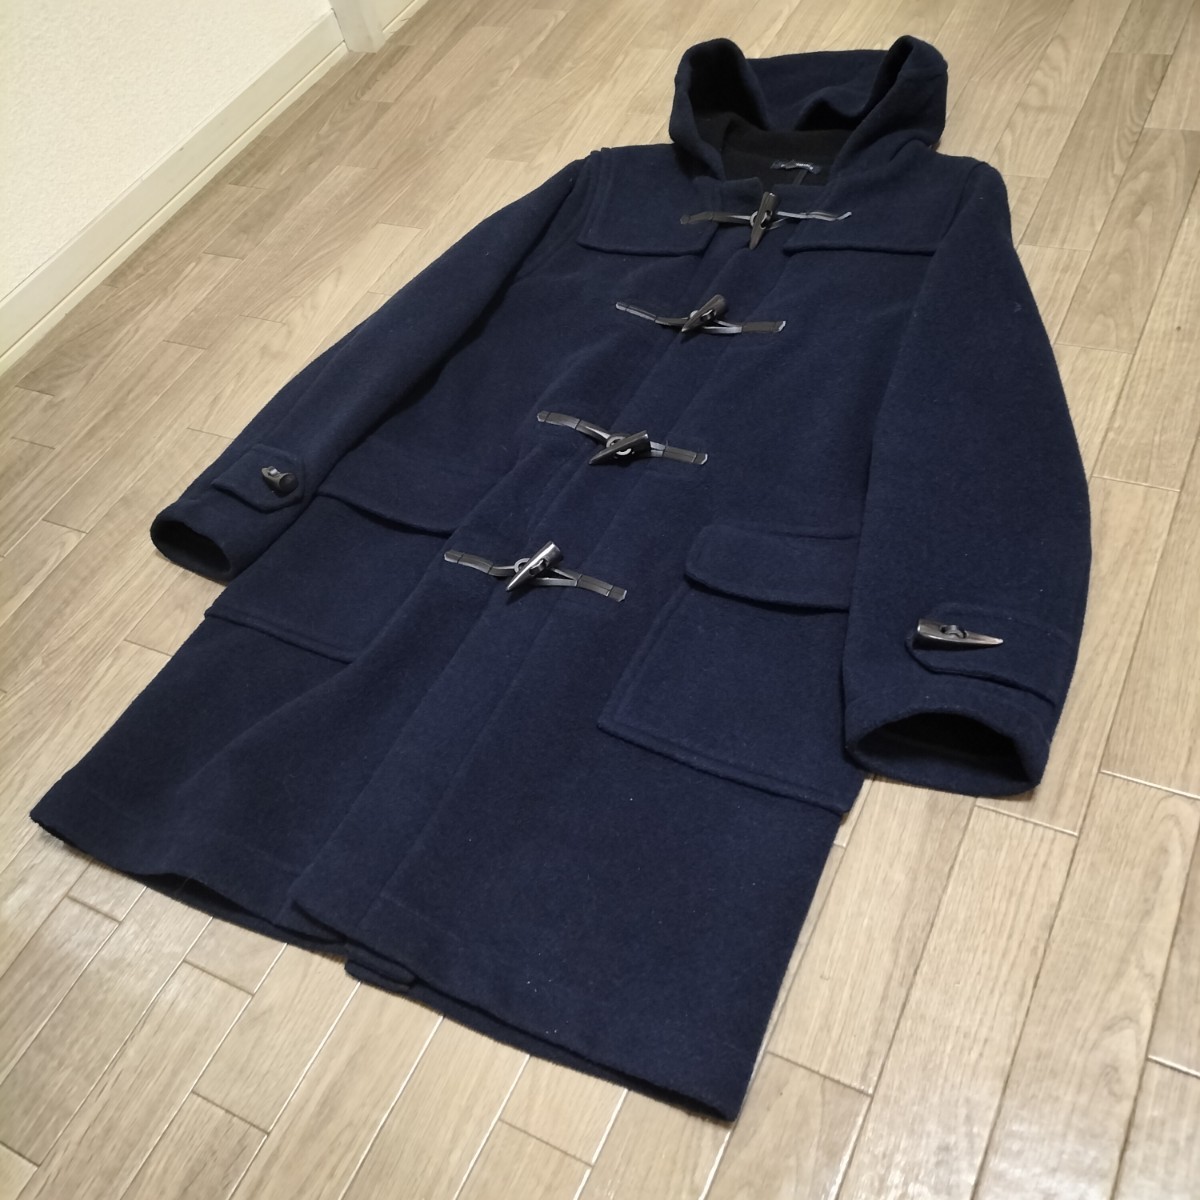  beautiful goods * Urban Research duffle coat wool melt n jacket cow leather outer navy size 38 URBAN RESEARCH brand old clothes USED